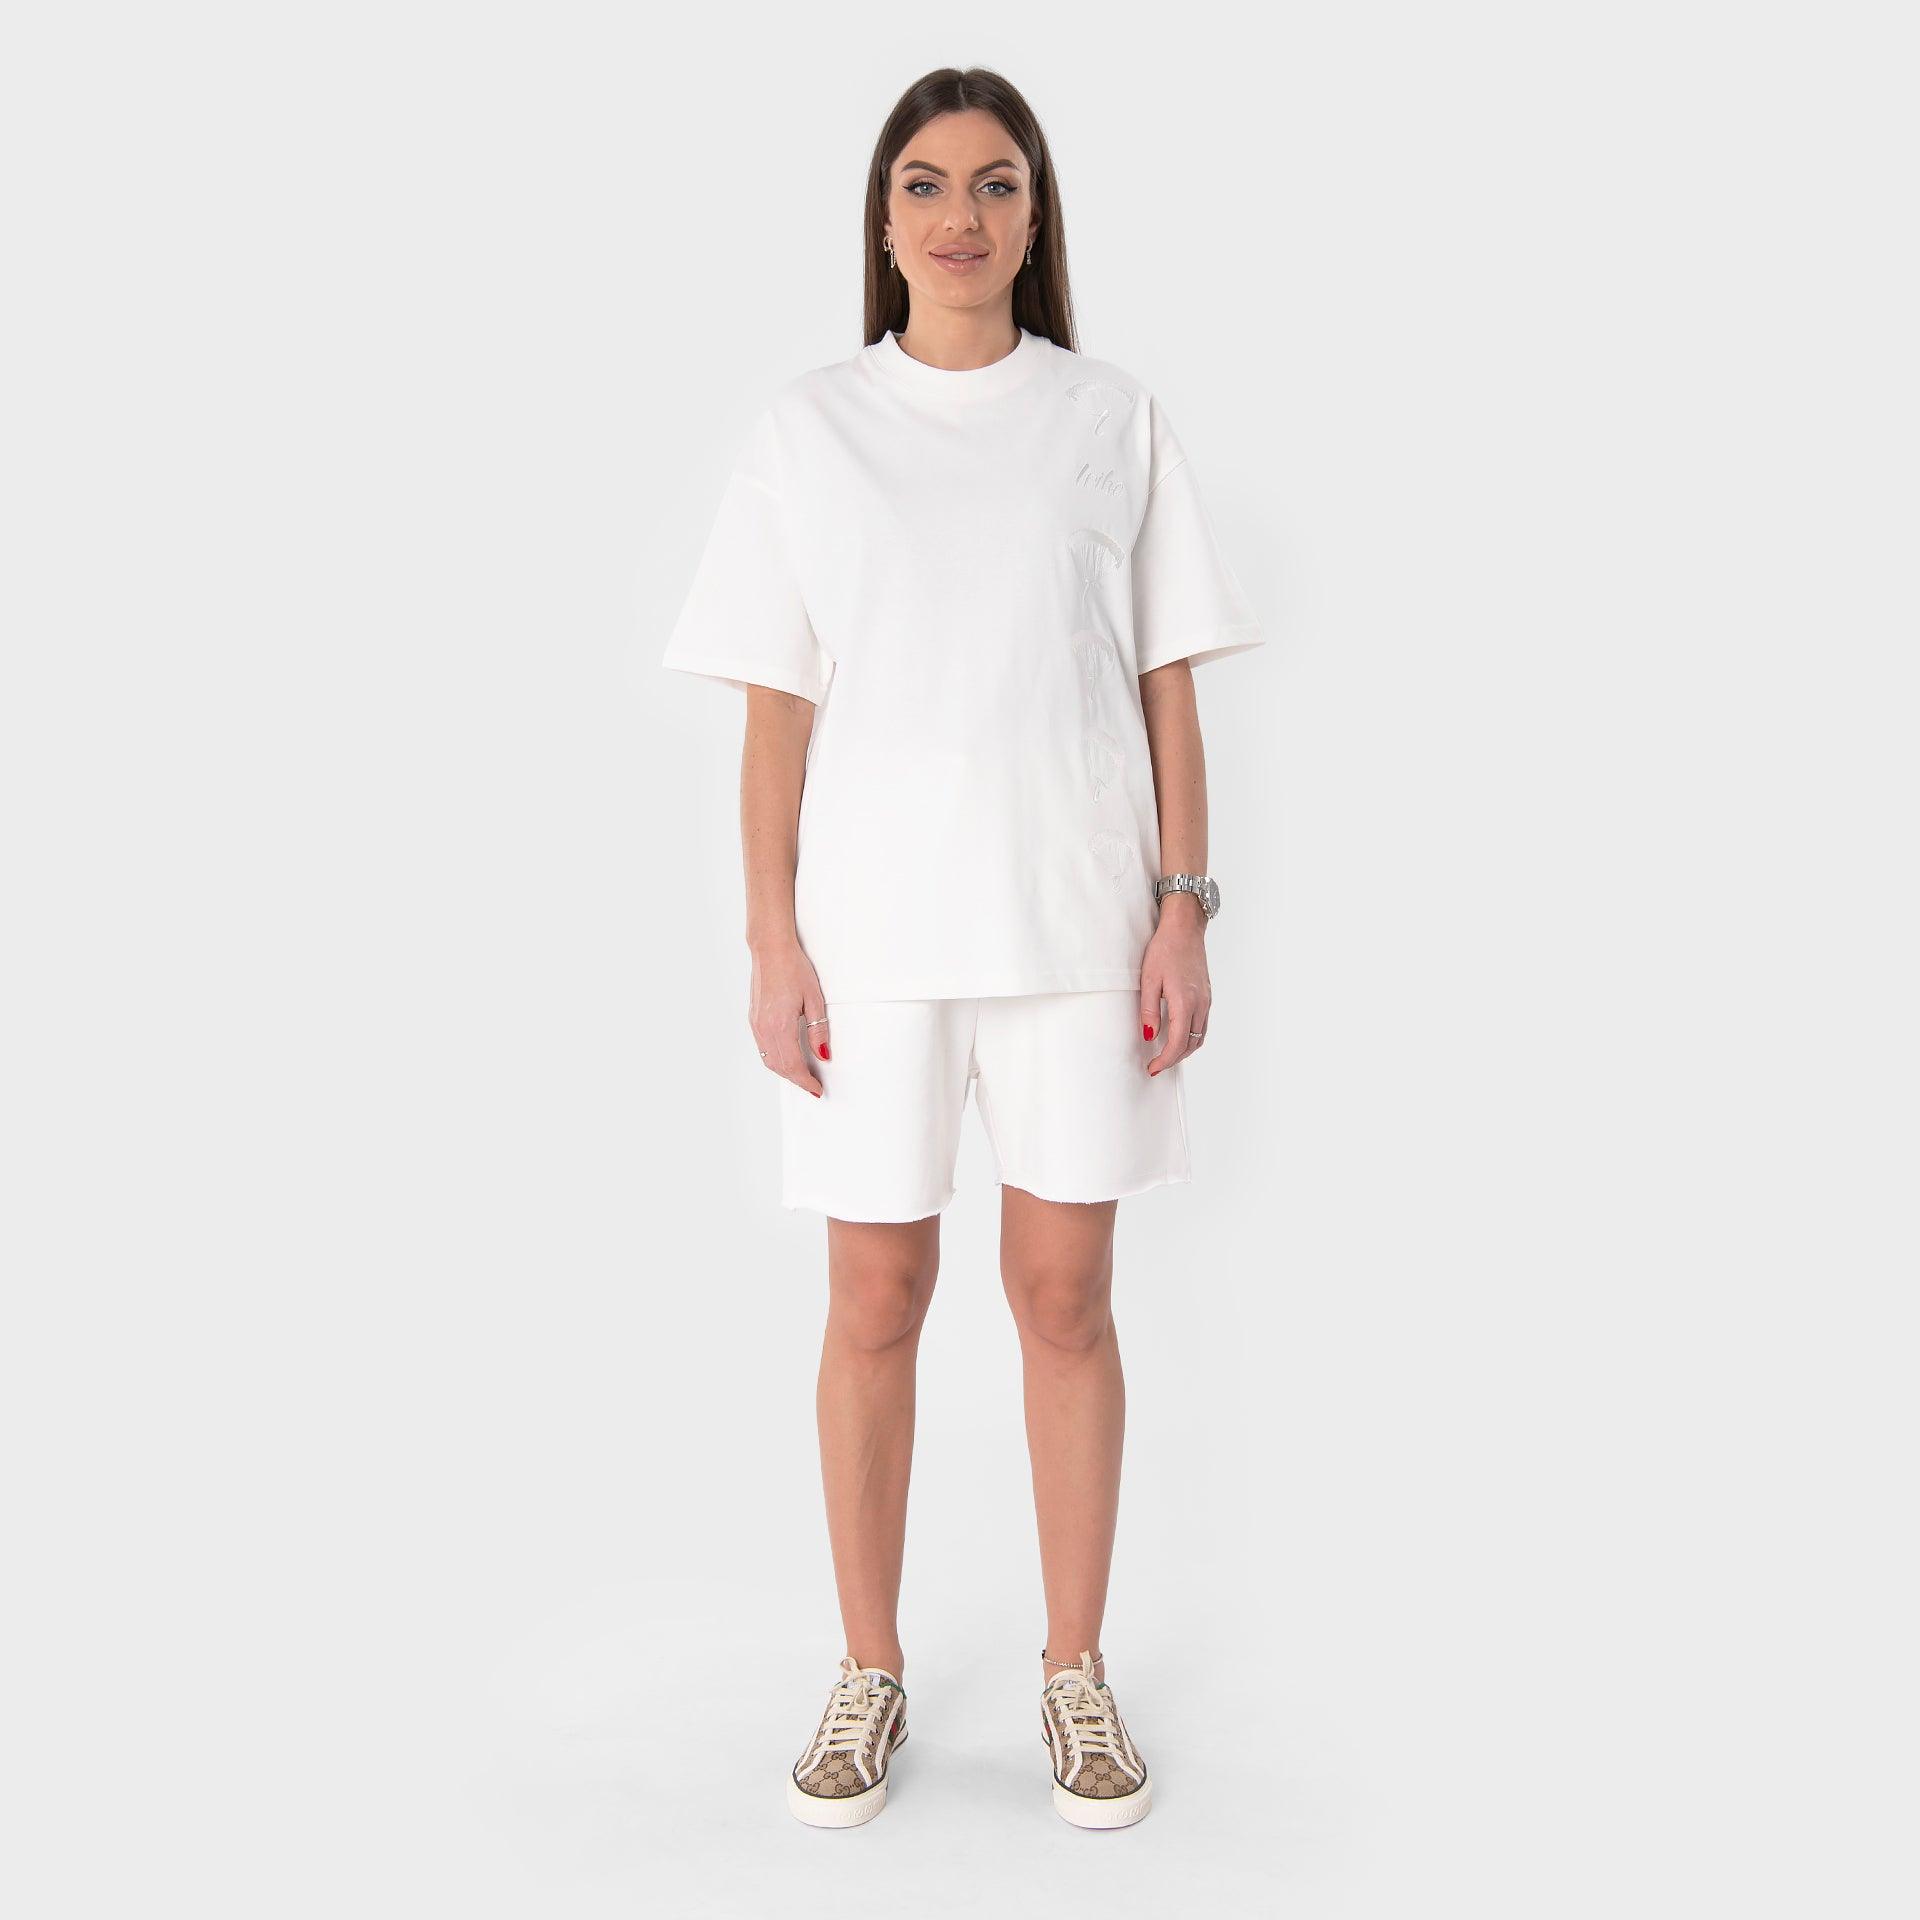 White Parachute T-shirt From Tribe - WECRE8